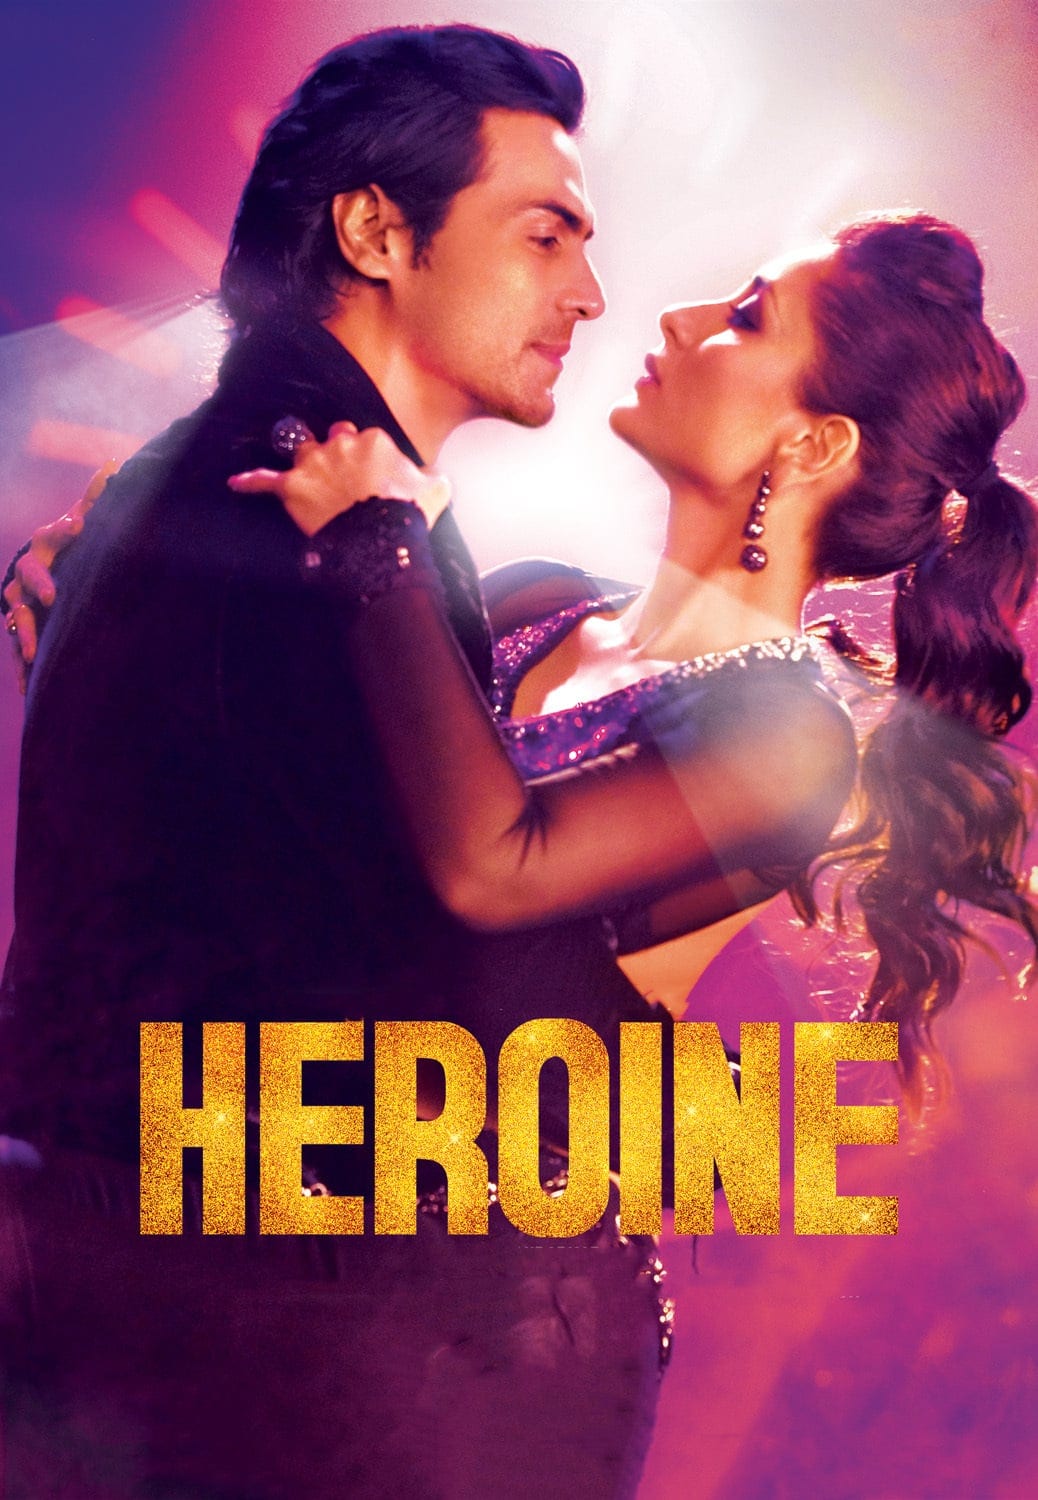 Poster for the movie "Heroine"